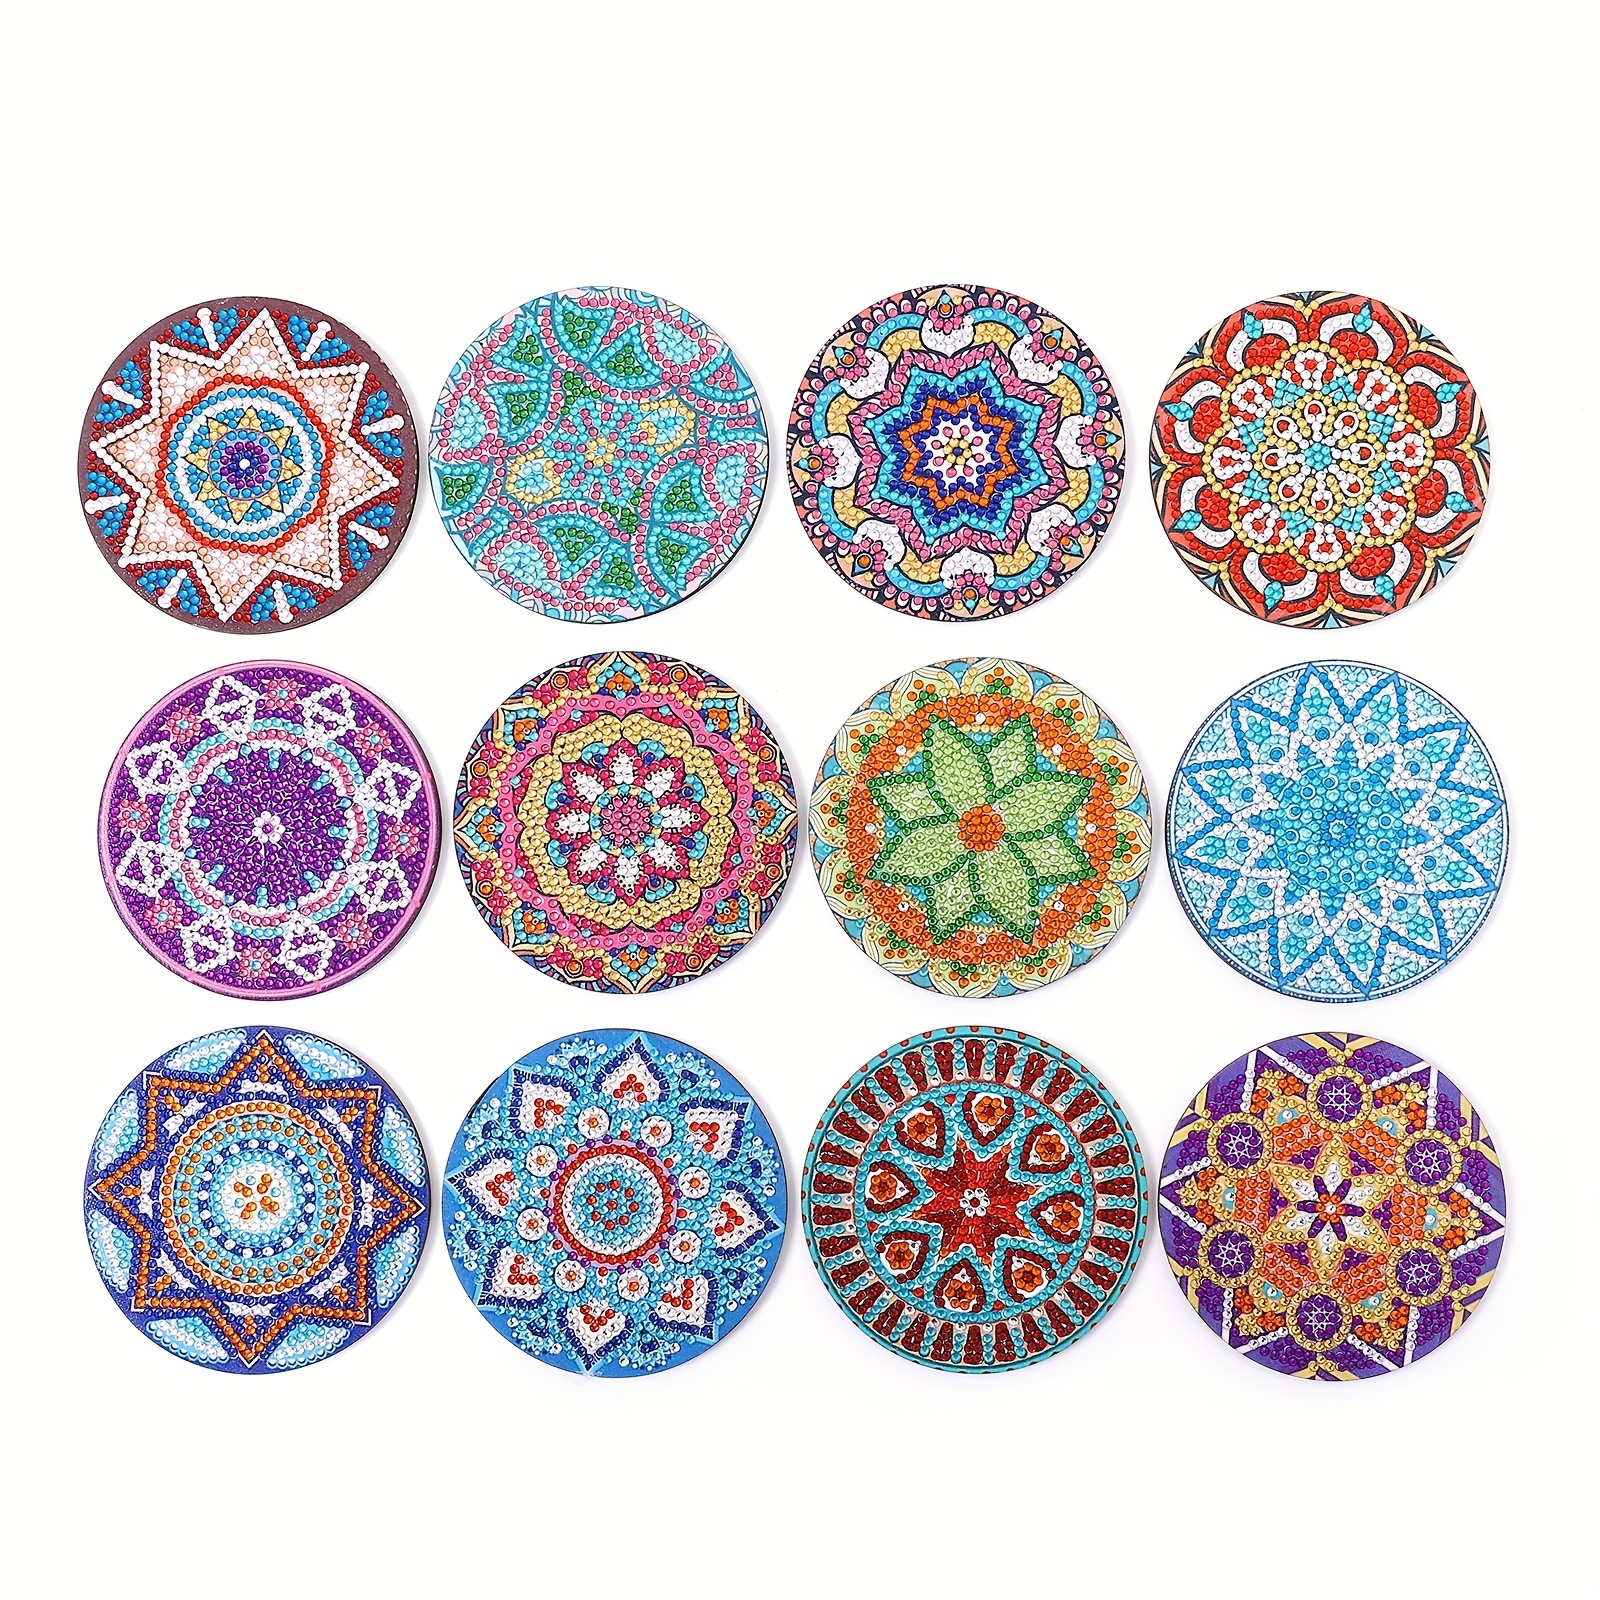 BSRESIN 8 Pcs Ocean Diamond Painting Coasters with Holder, Square Diamond  Art Coasters Small Diamond Painting Kits, DIY Crafts for Adults